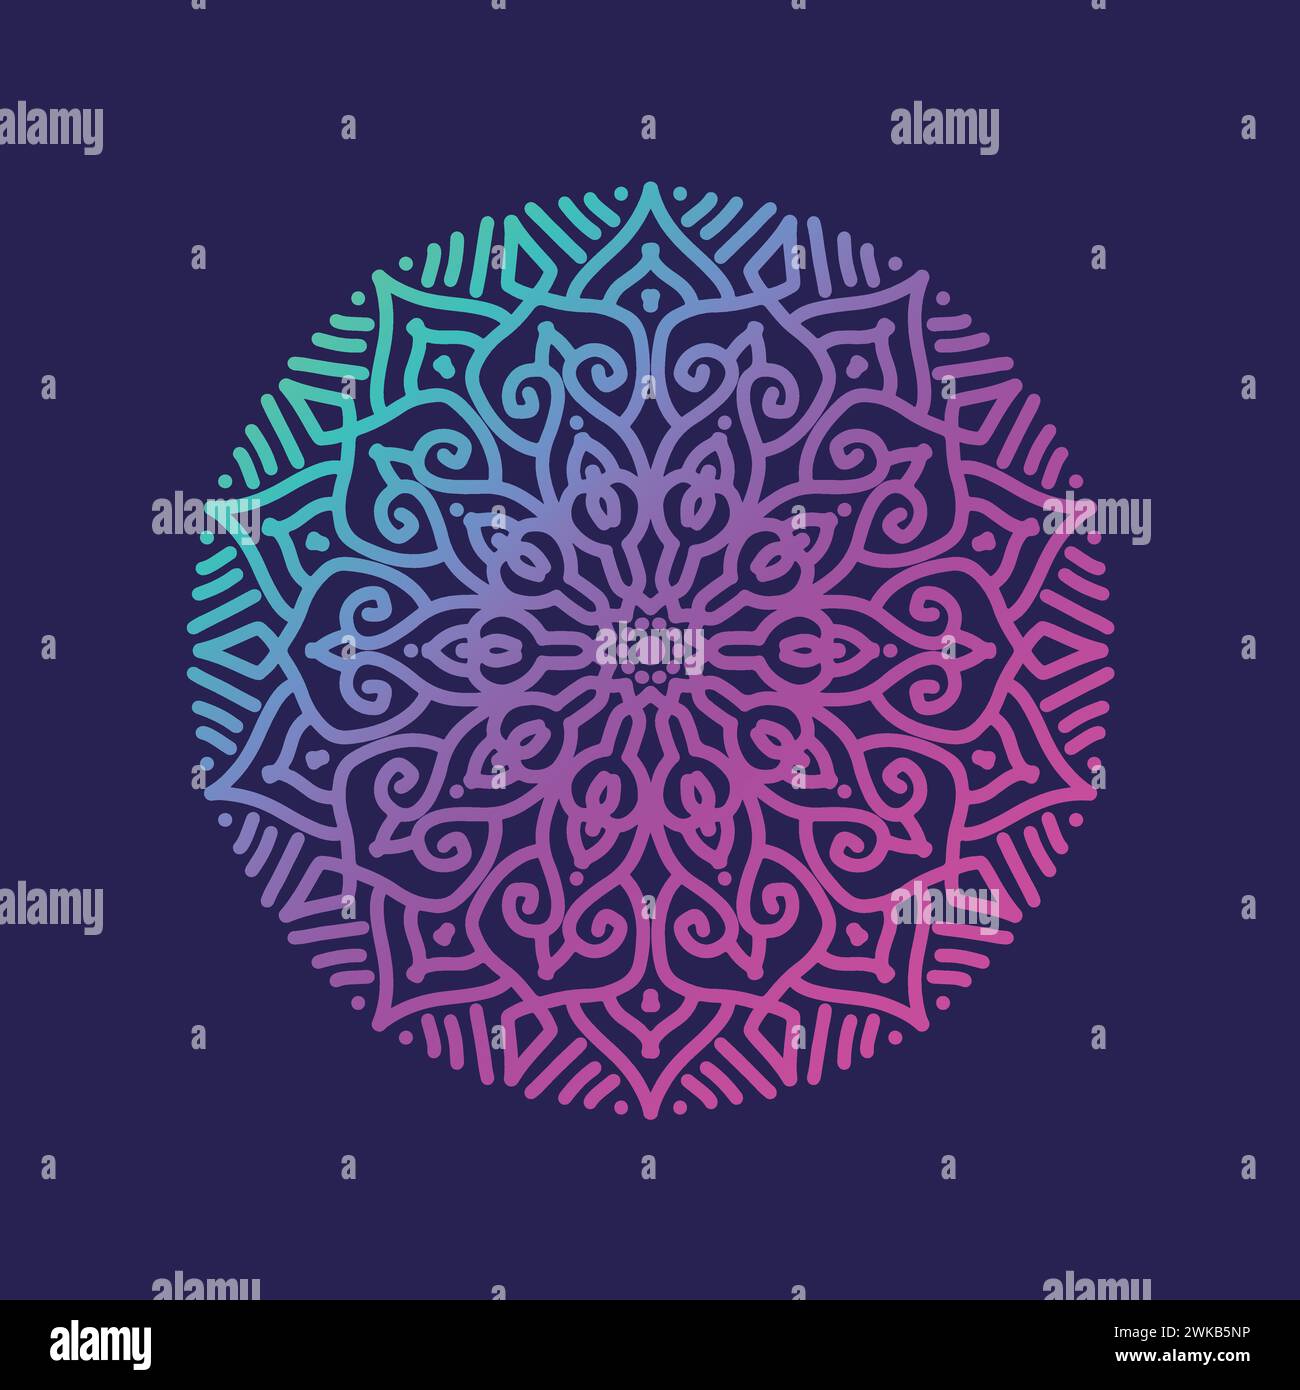 Coloring mandala design vector illustration. ethnic ornament decoration floral round abstract mandala pattern vector illustration. Stock Vector